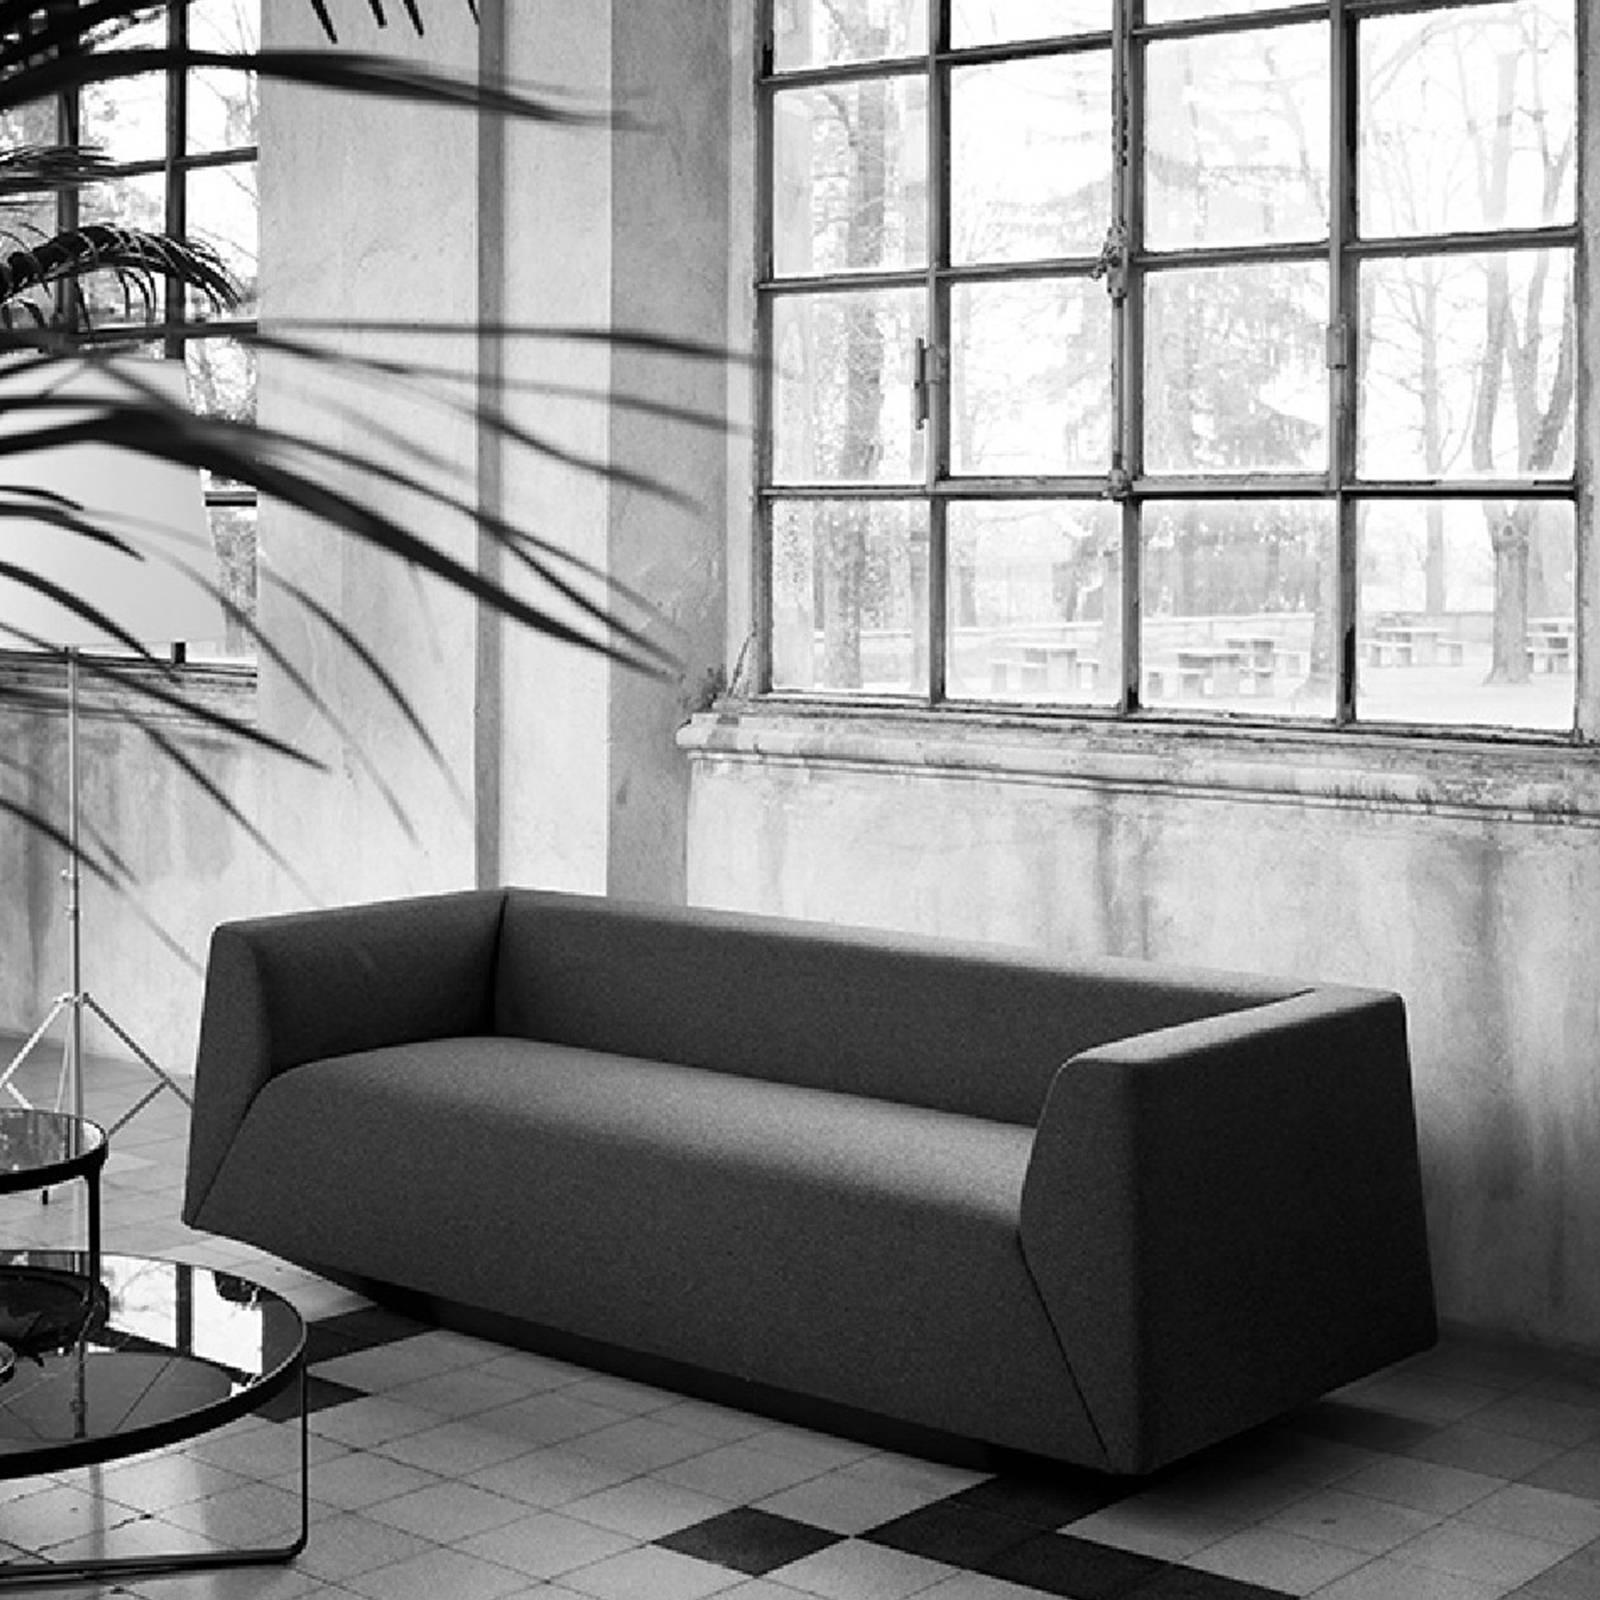 Established by Luke Pearson and Tom Lloyd in 1997, the award-winning Pearson Lloyd firm is one of the leading design studios in England. They have collaborated with Tacchini for several pieces, including this superb sofa. Distinctive for its oblique